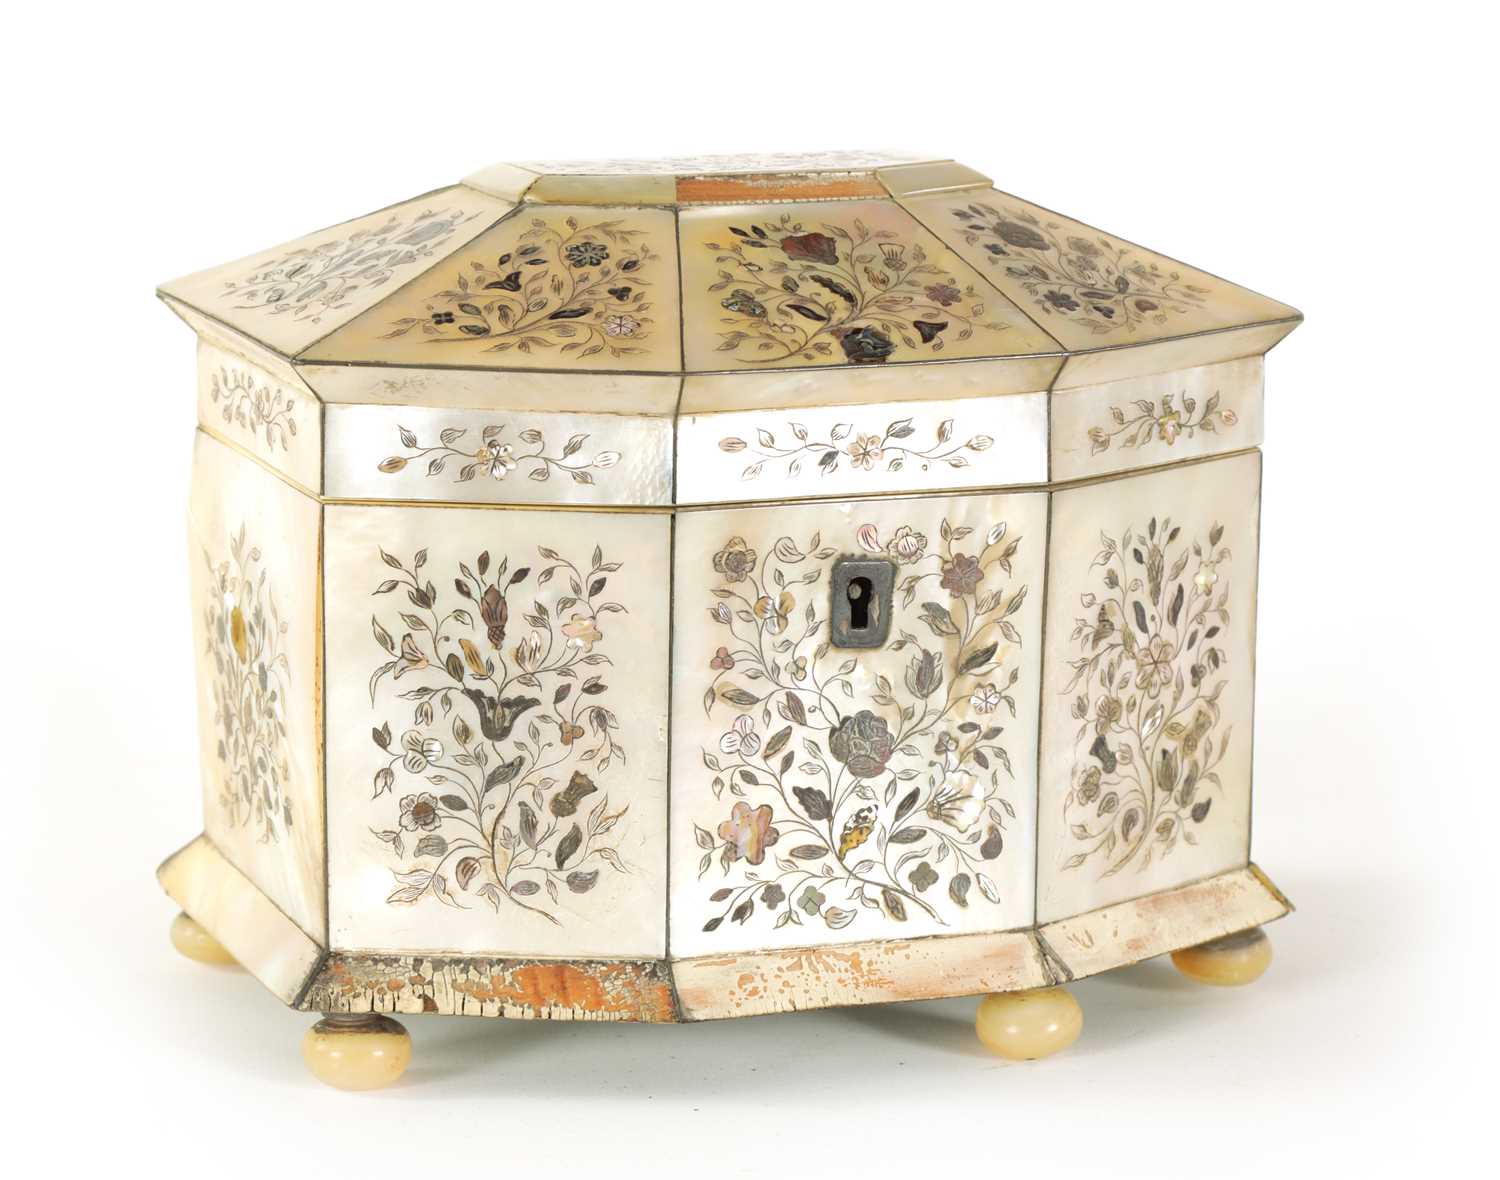 A 19TH CENTURY INLAID MOTHER OF PEARL TEA CADDY WITH CANTED ANGLED FRONT